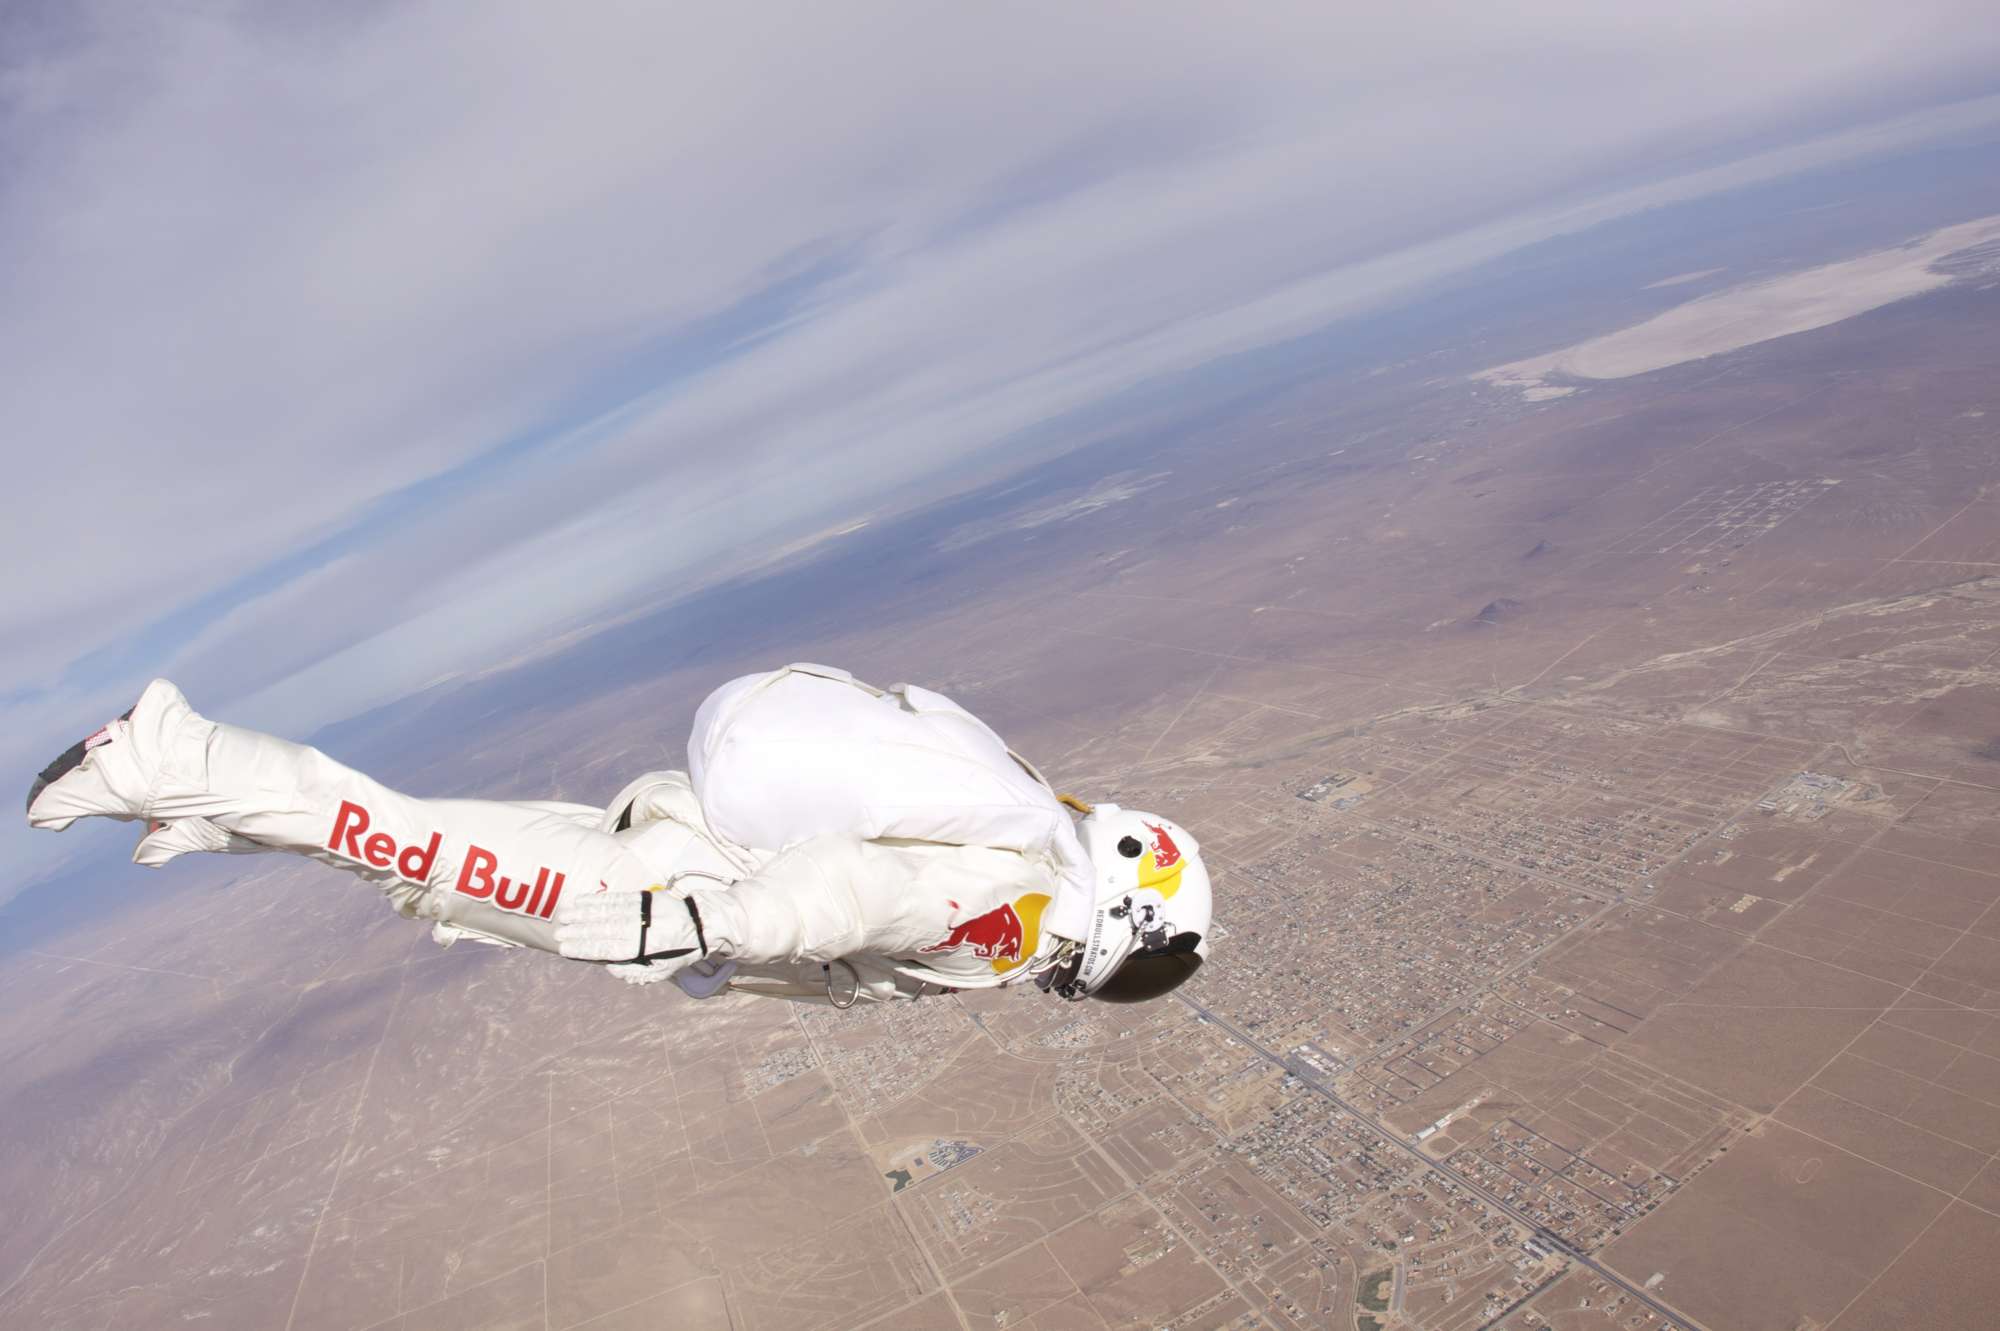 Red Bull Stratos - freefall from the edge of space